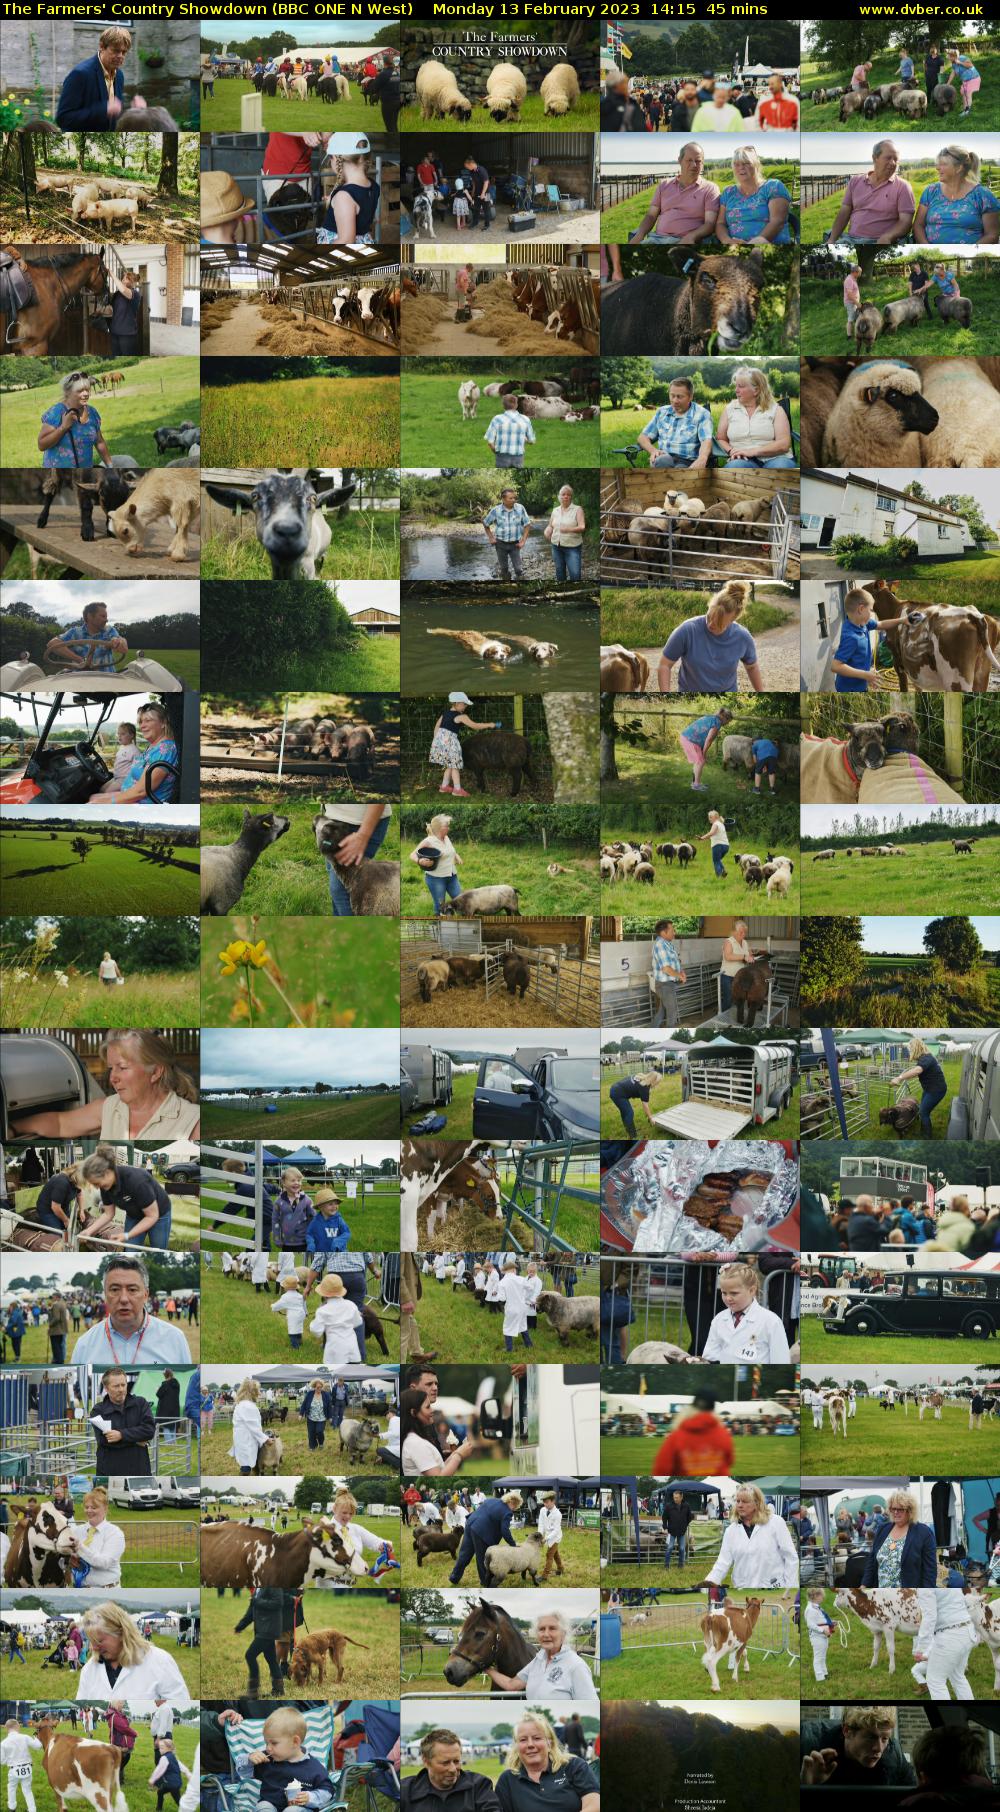 The Farmers' Country Showdown (BBC ONE N West) Monday 13 February 2023 14:15 - 15:00